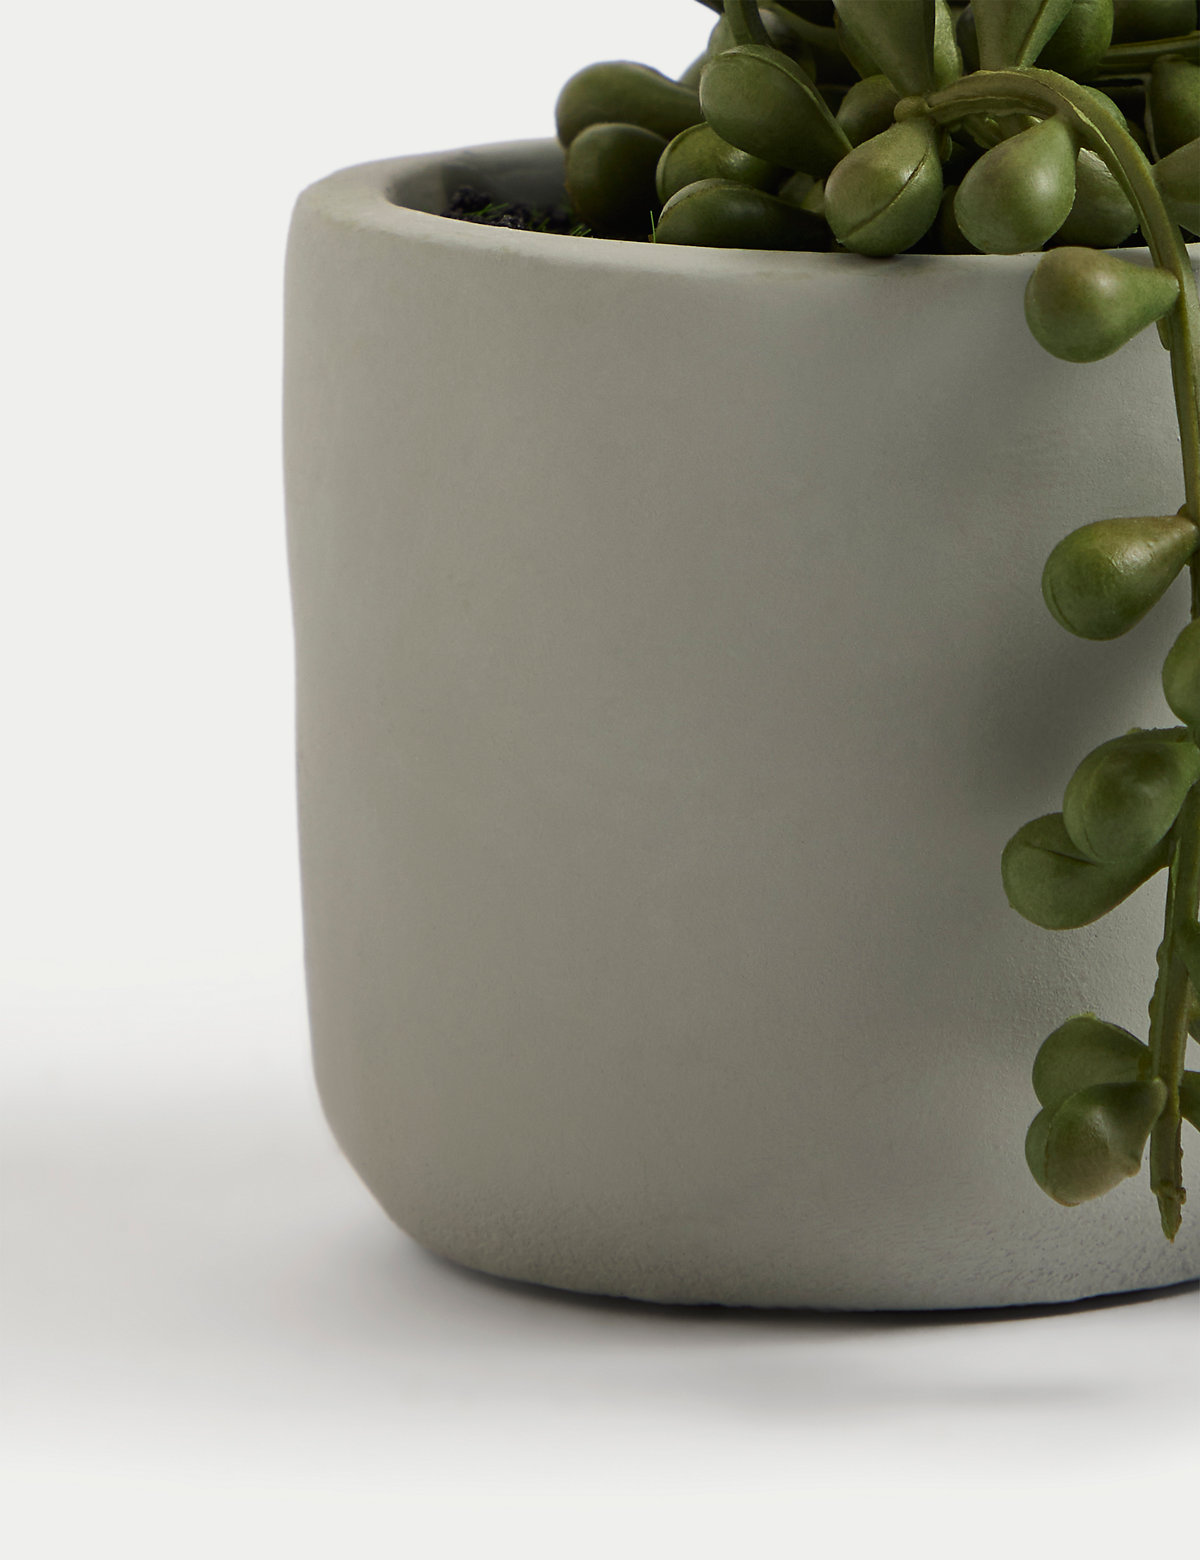 Artificial Mini String of Pearls in Pot